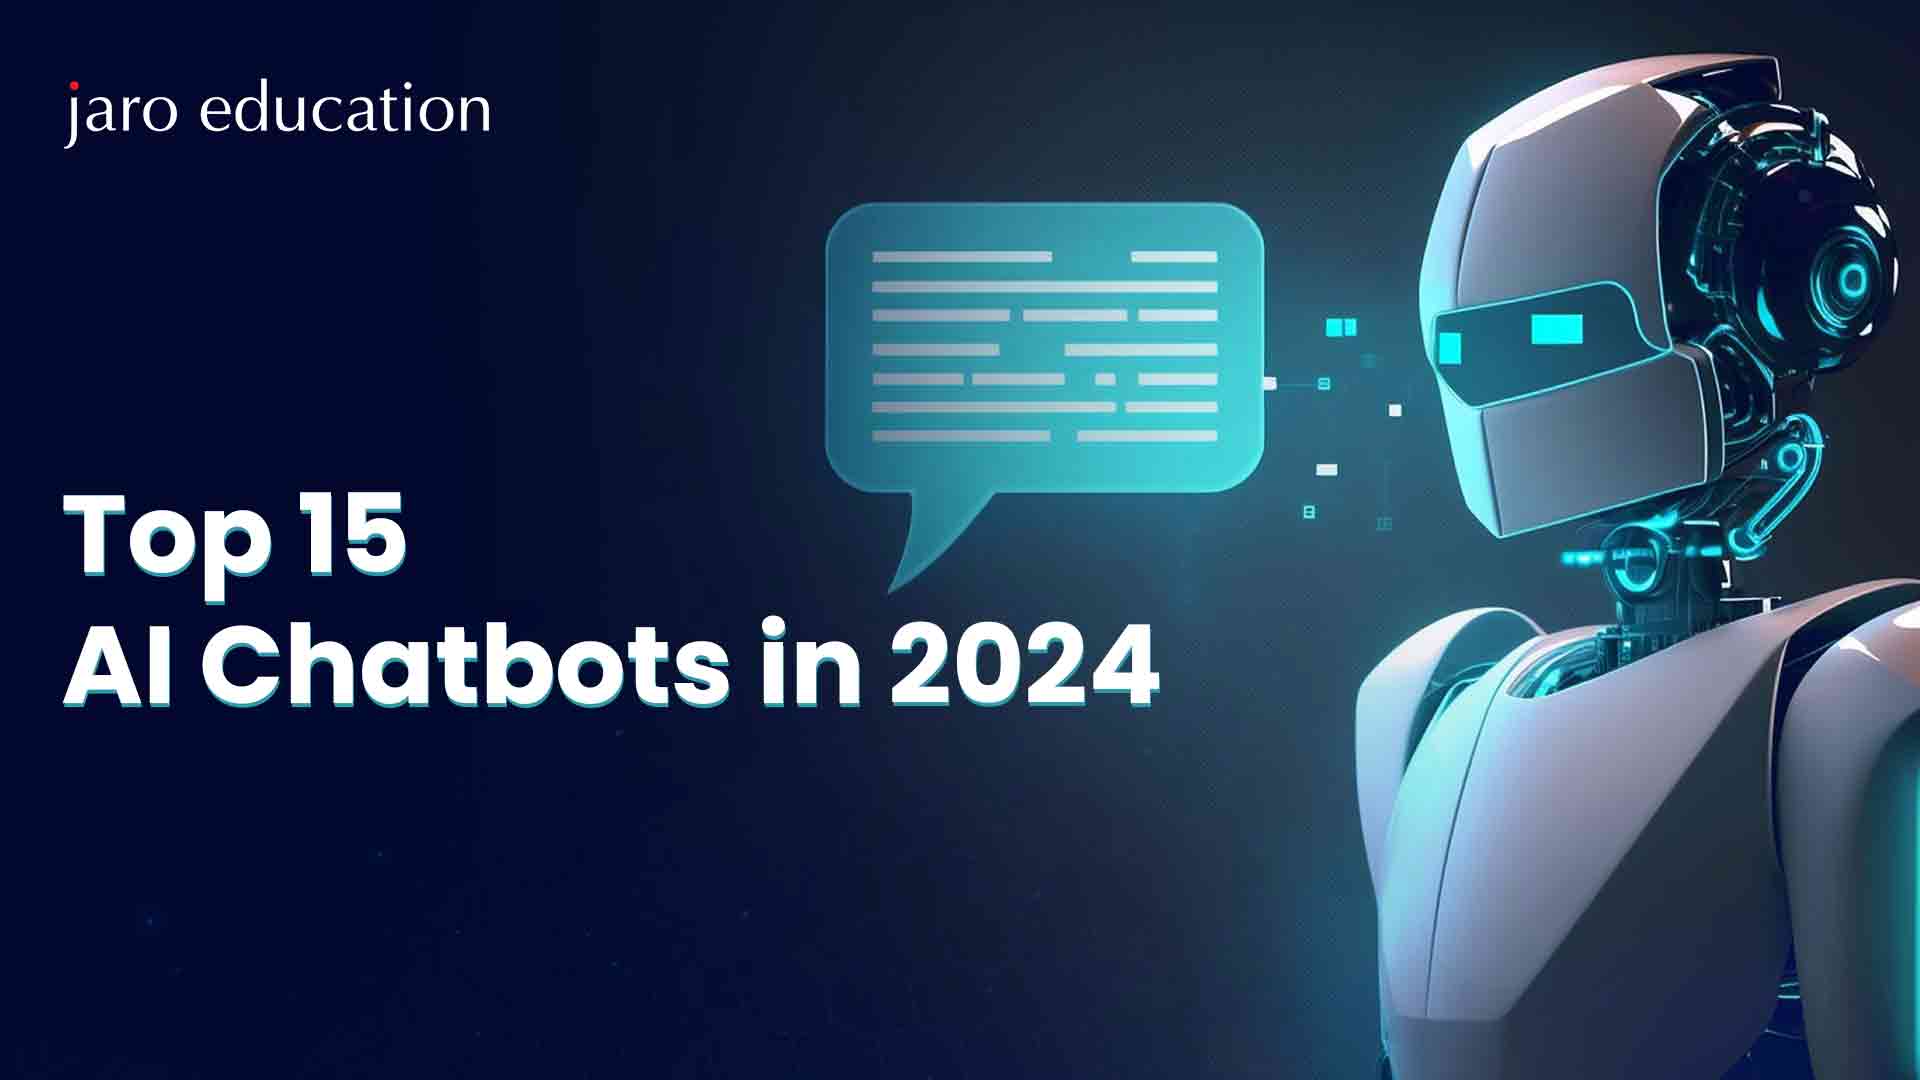 Top 15 AI Chatbots in 2024